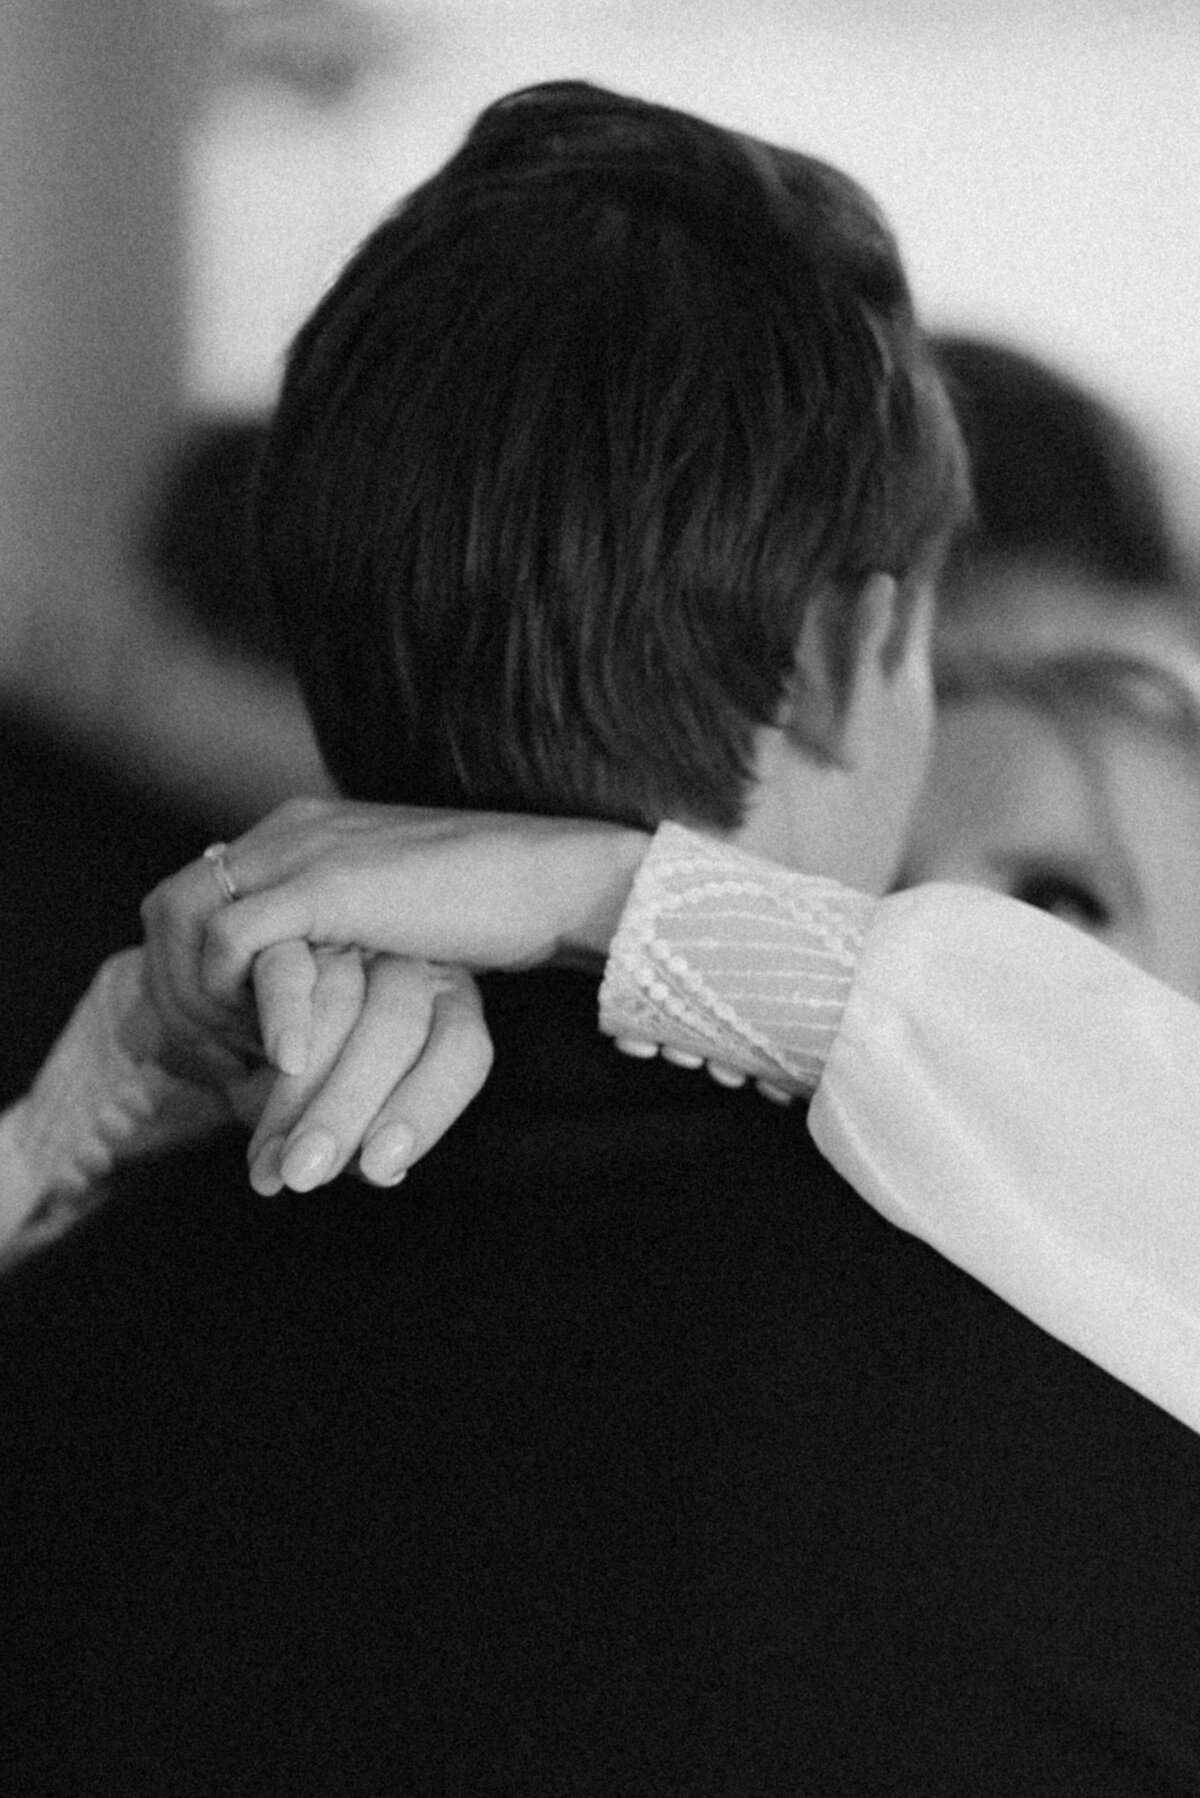 A documentary wedding  photo of  the first dance in Oitbacka gård captured by wedding photographer Hannika Gabrielsson in Finland